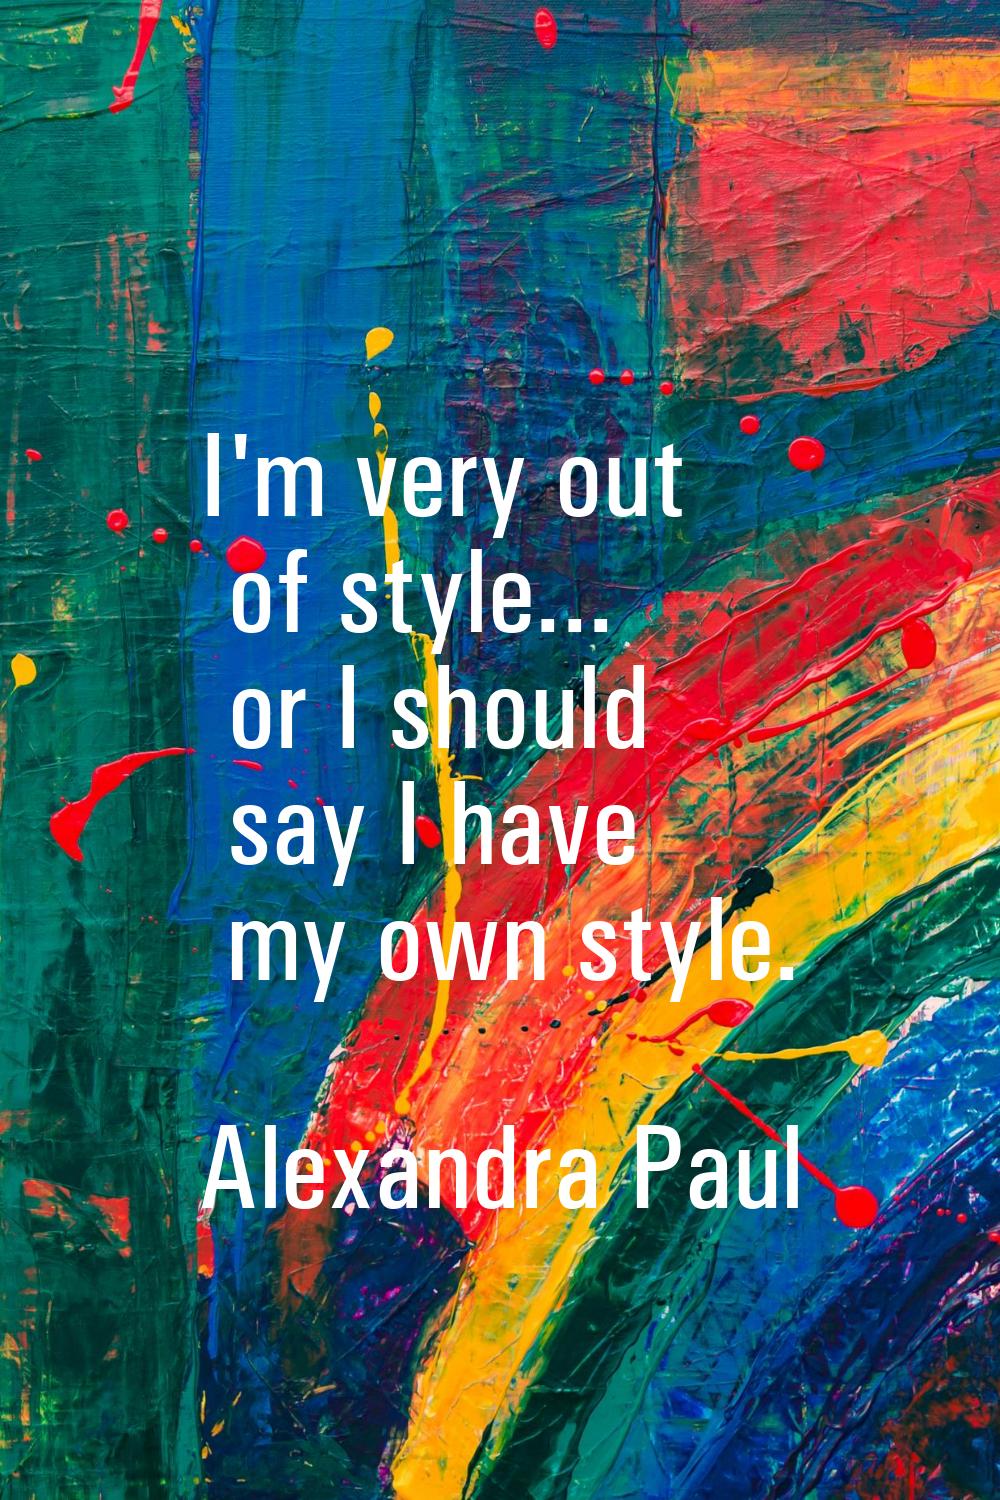 I'm very out of style... or I should say I have my own style.